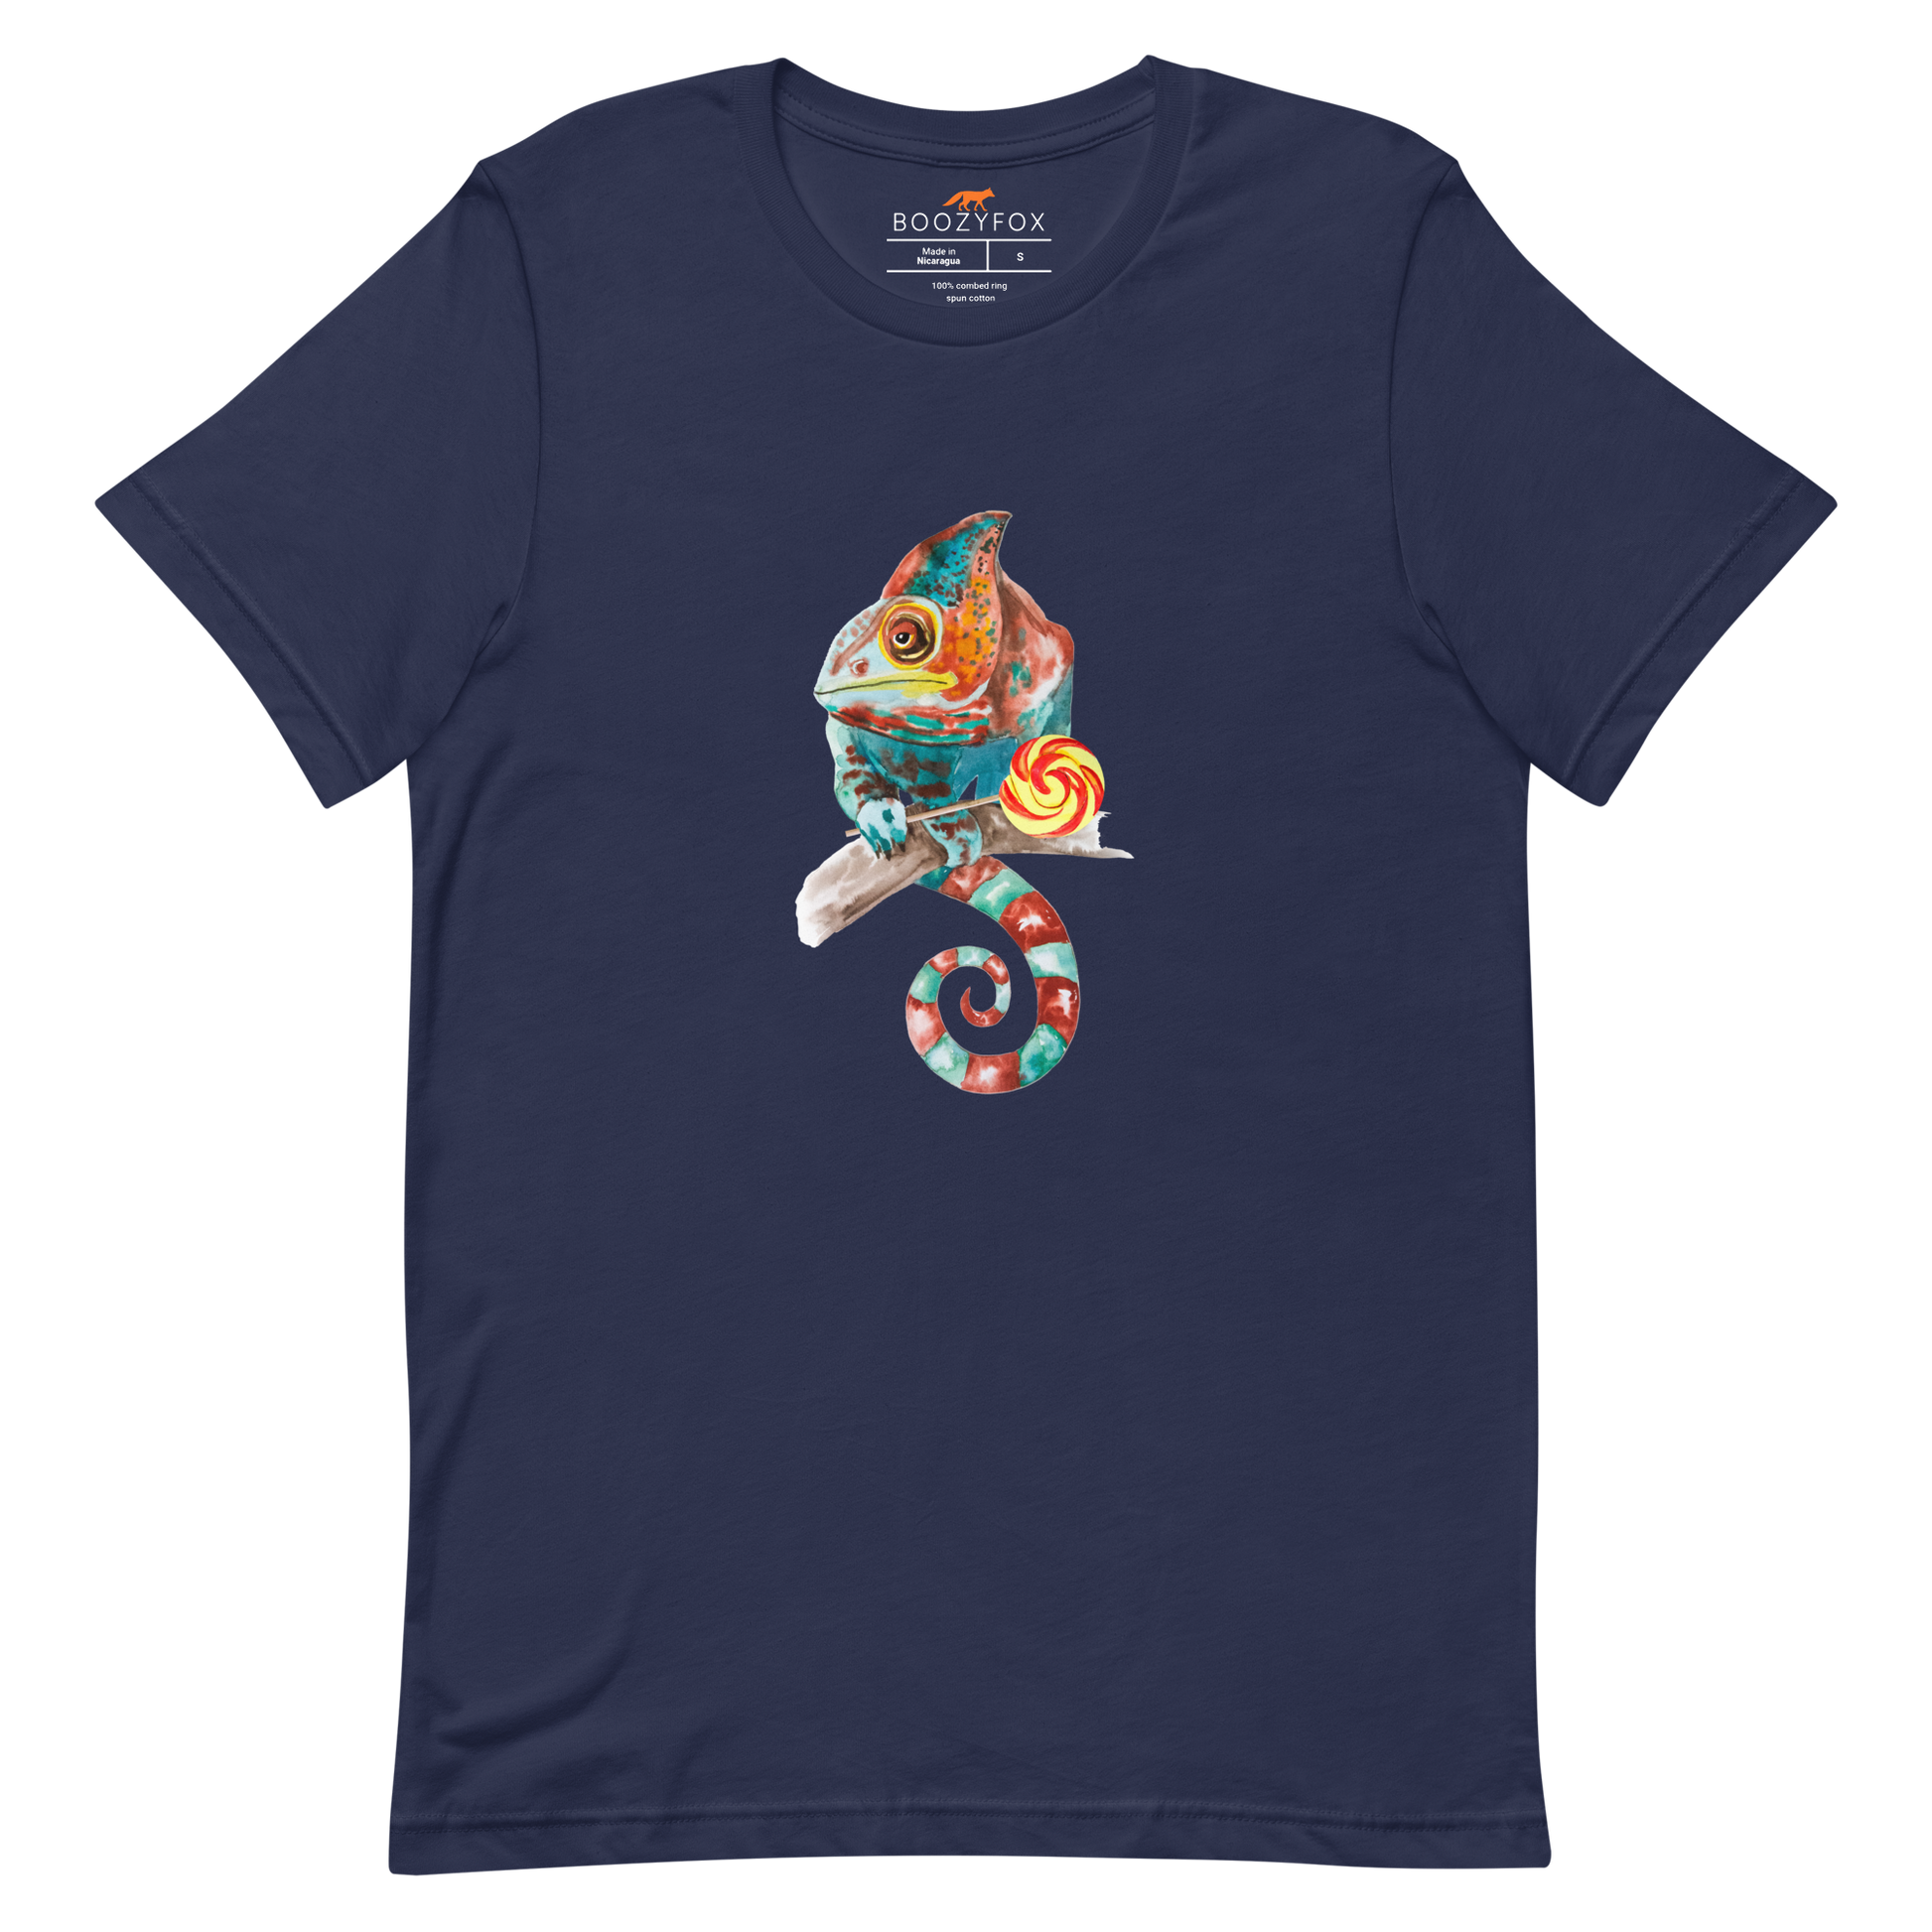 Navy Premium Chameleon T-Shirt featuring a charming Chameleon With A Lollipop graphic on the chest - Cool Graphic Chameleon Tees - Boozy Fox